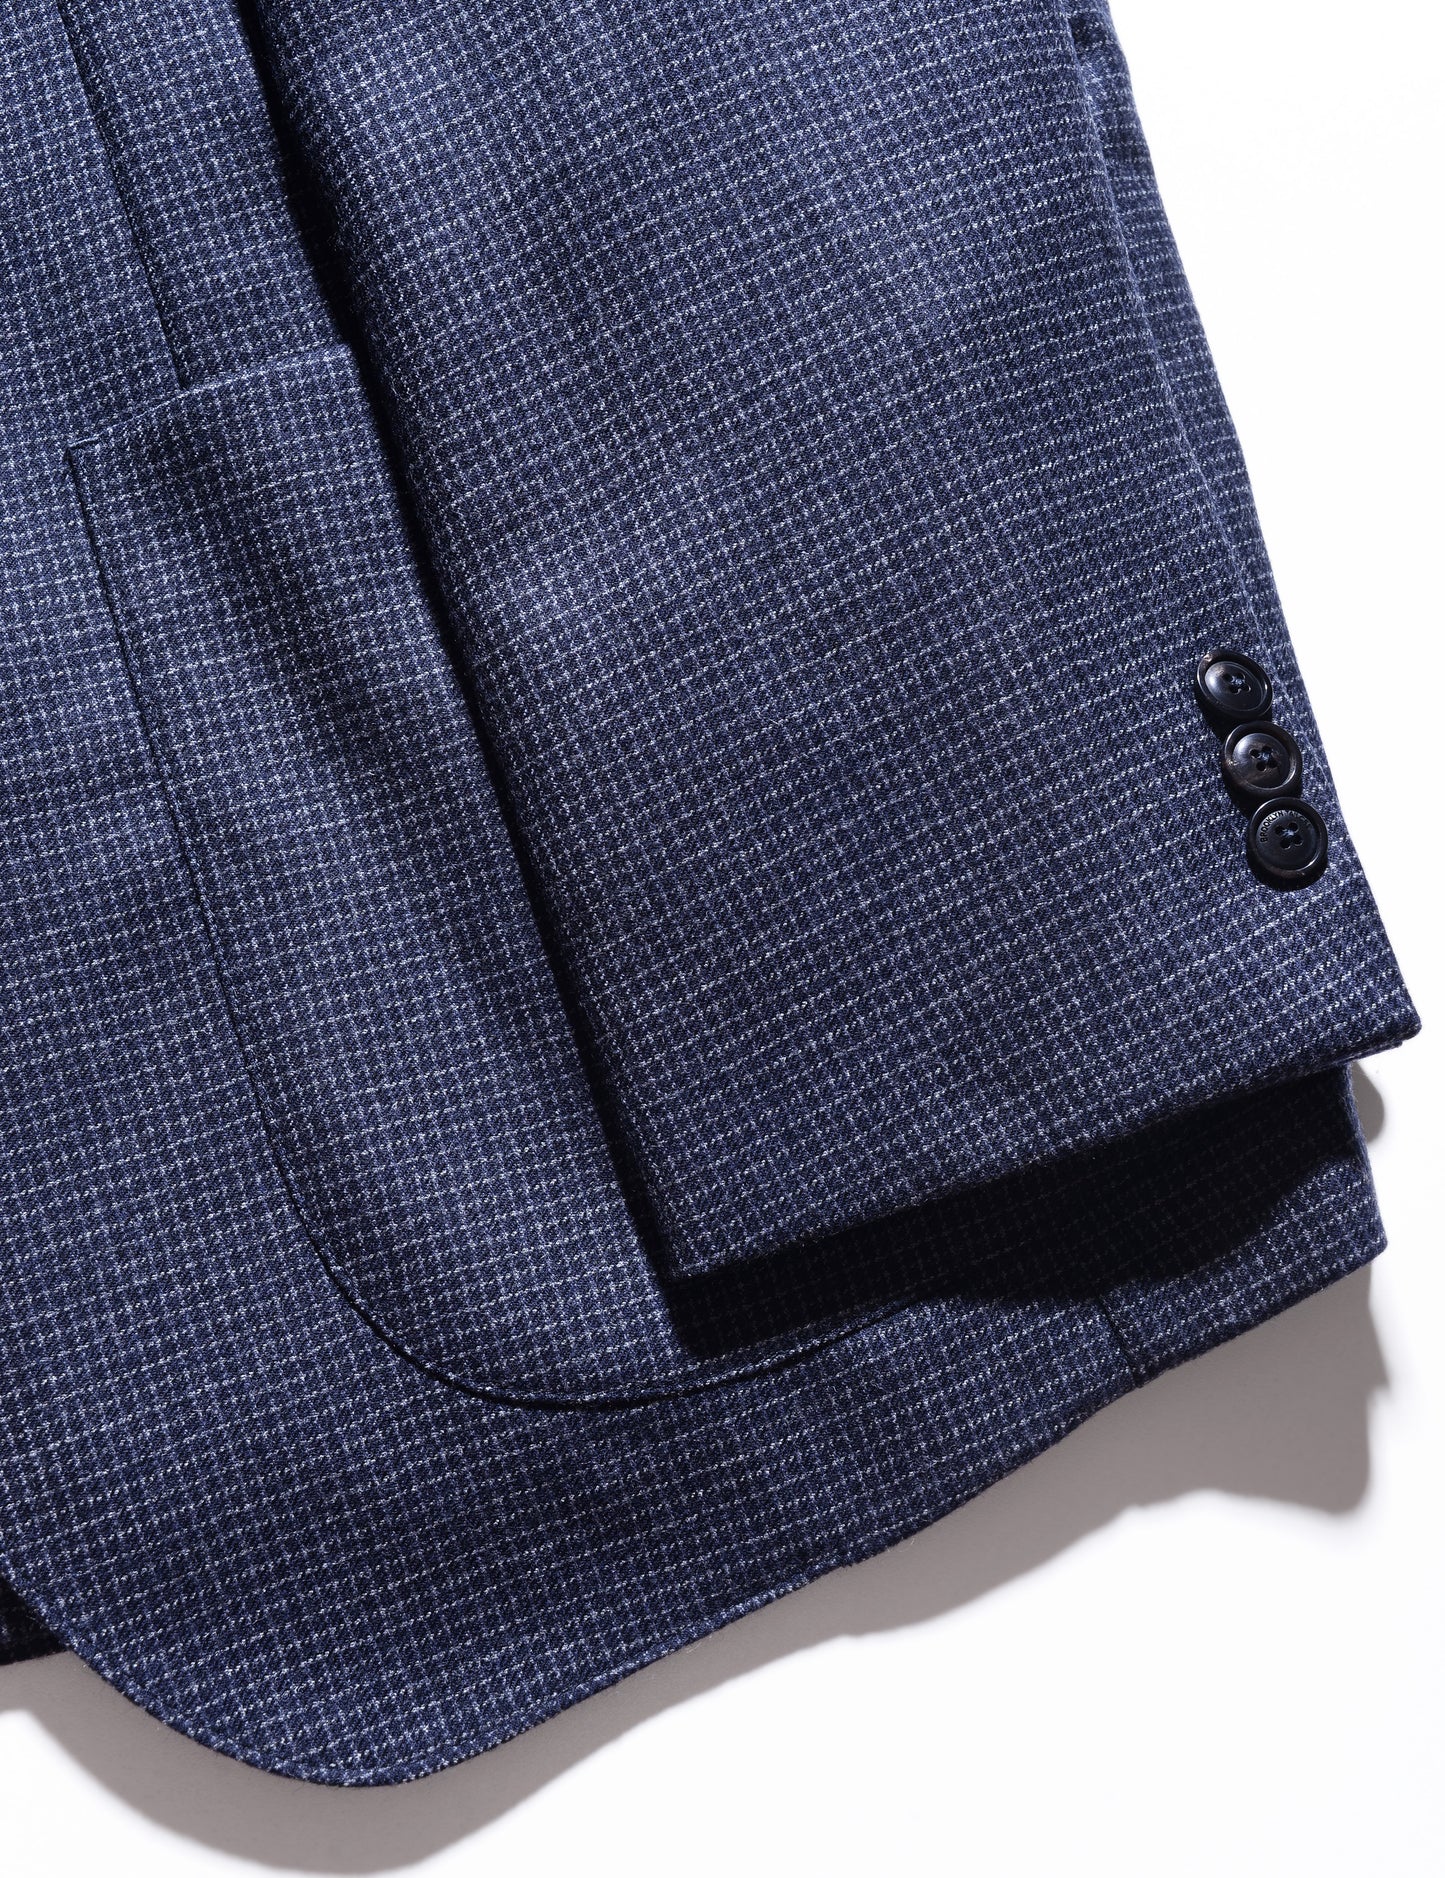 Detail shot of cuff, patch pocket, and fabric pattern on Brooklyn Tailors BKT35 Unstructured Jacket in Brushed Wool Microgrid - Navy